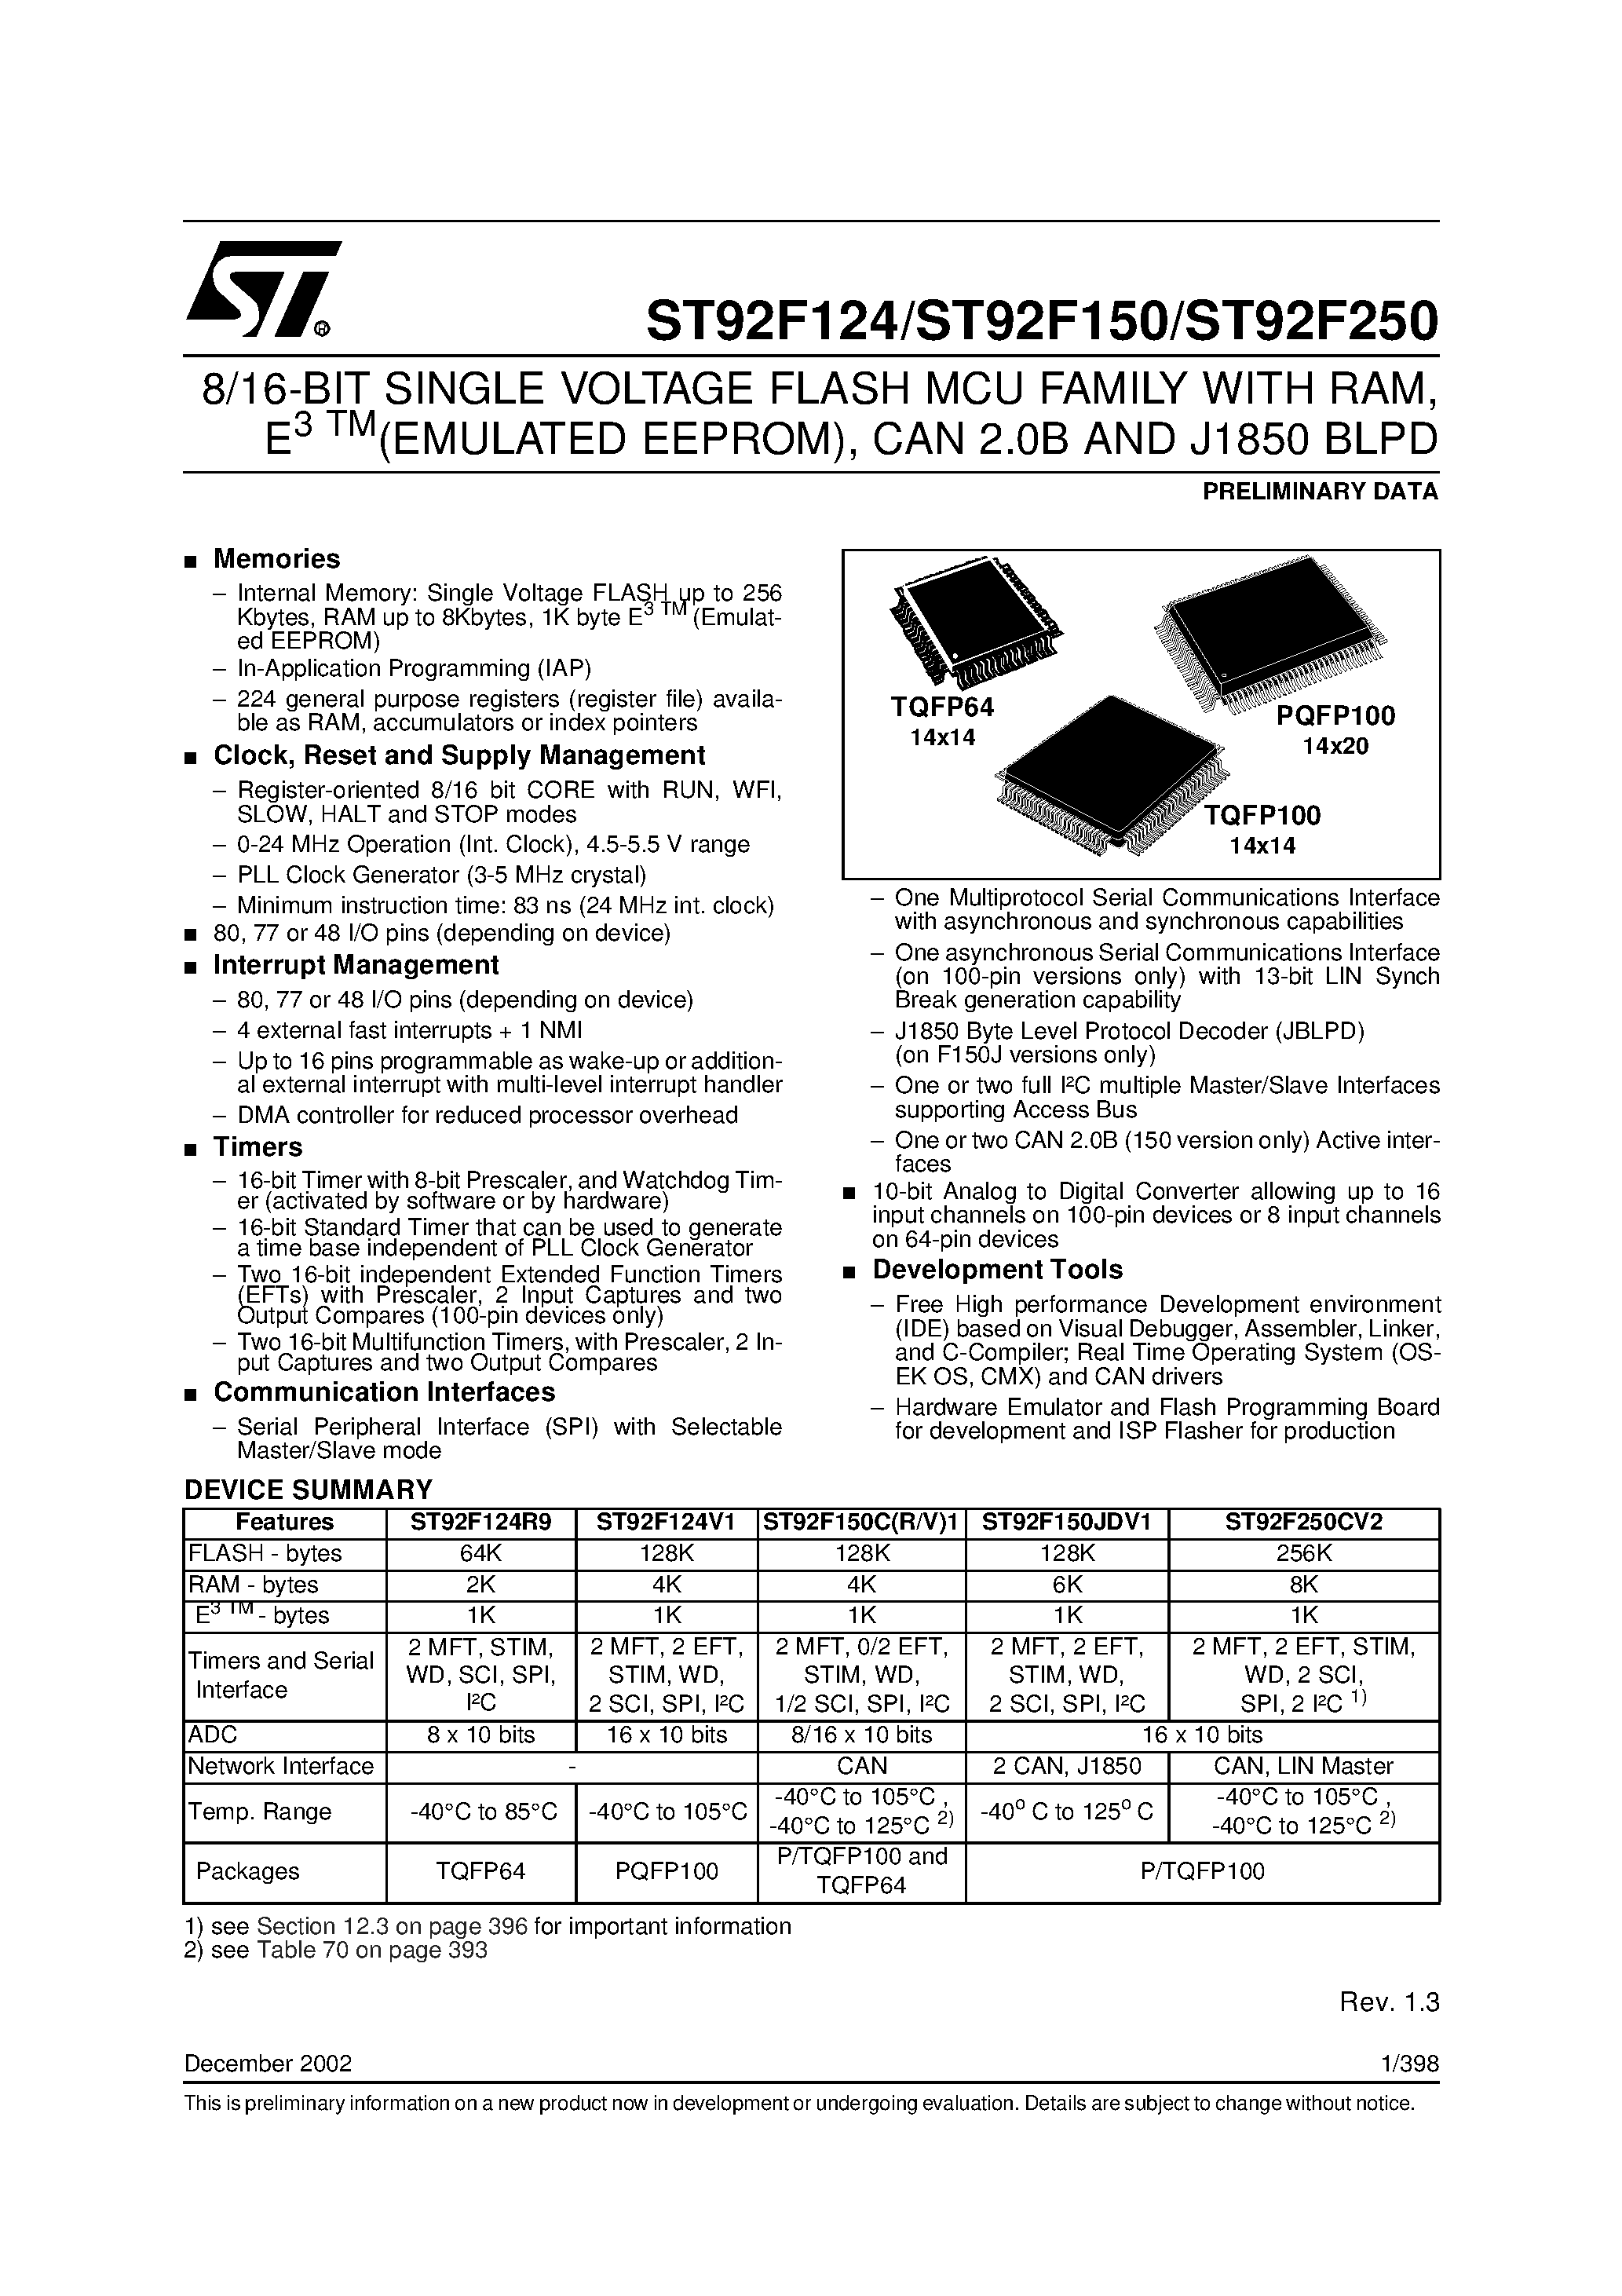 Datasheet ST92150 - 8/16-BIT SINGLE VOLTAGE FLASH MCU FAMILY WITH RAM / E3 TMEMULATED EEPROM / CAN 2.0B AND J1850 BLPD page 1